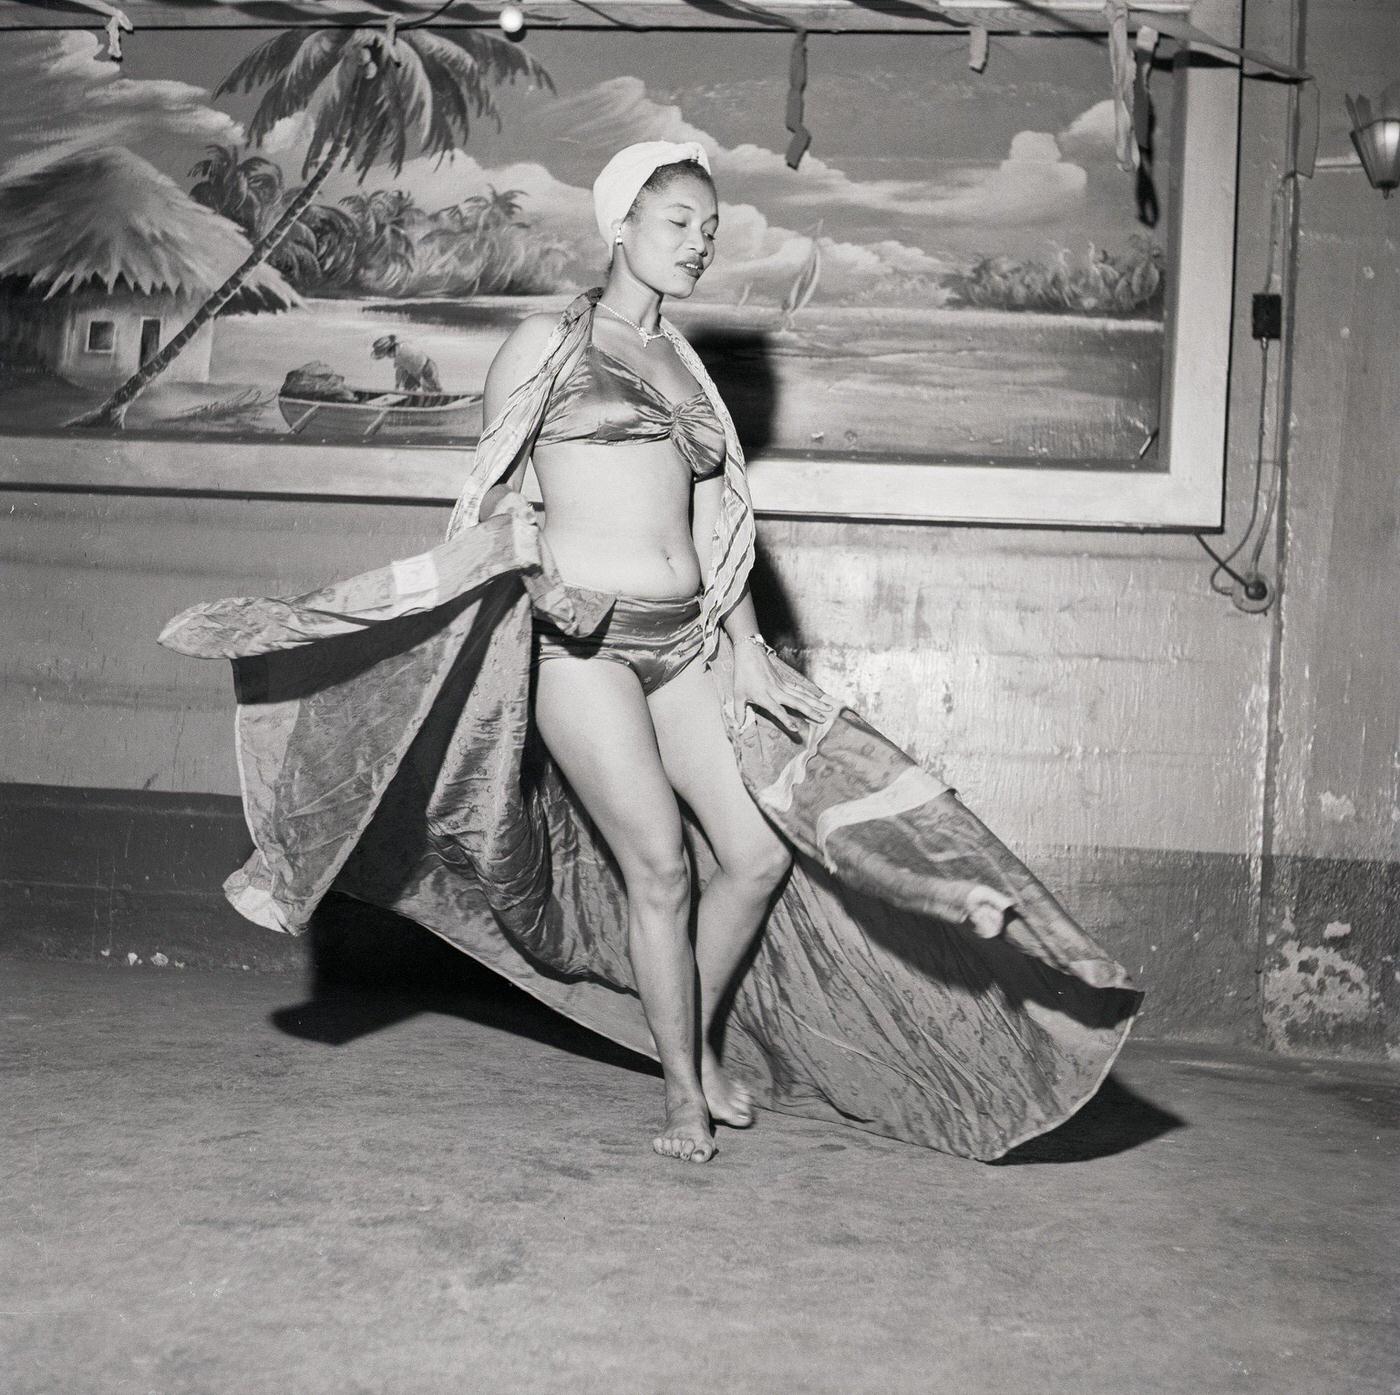 Woman performing in bikini and scarves, Trinidad